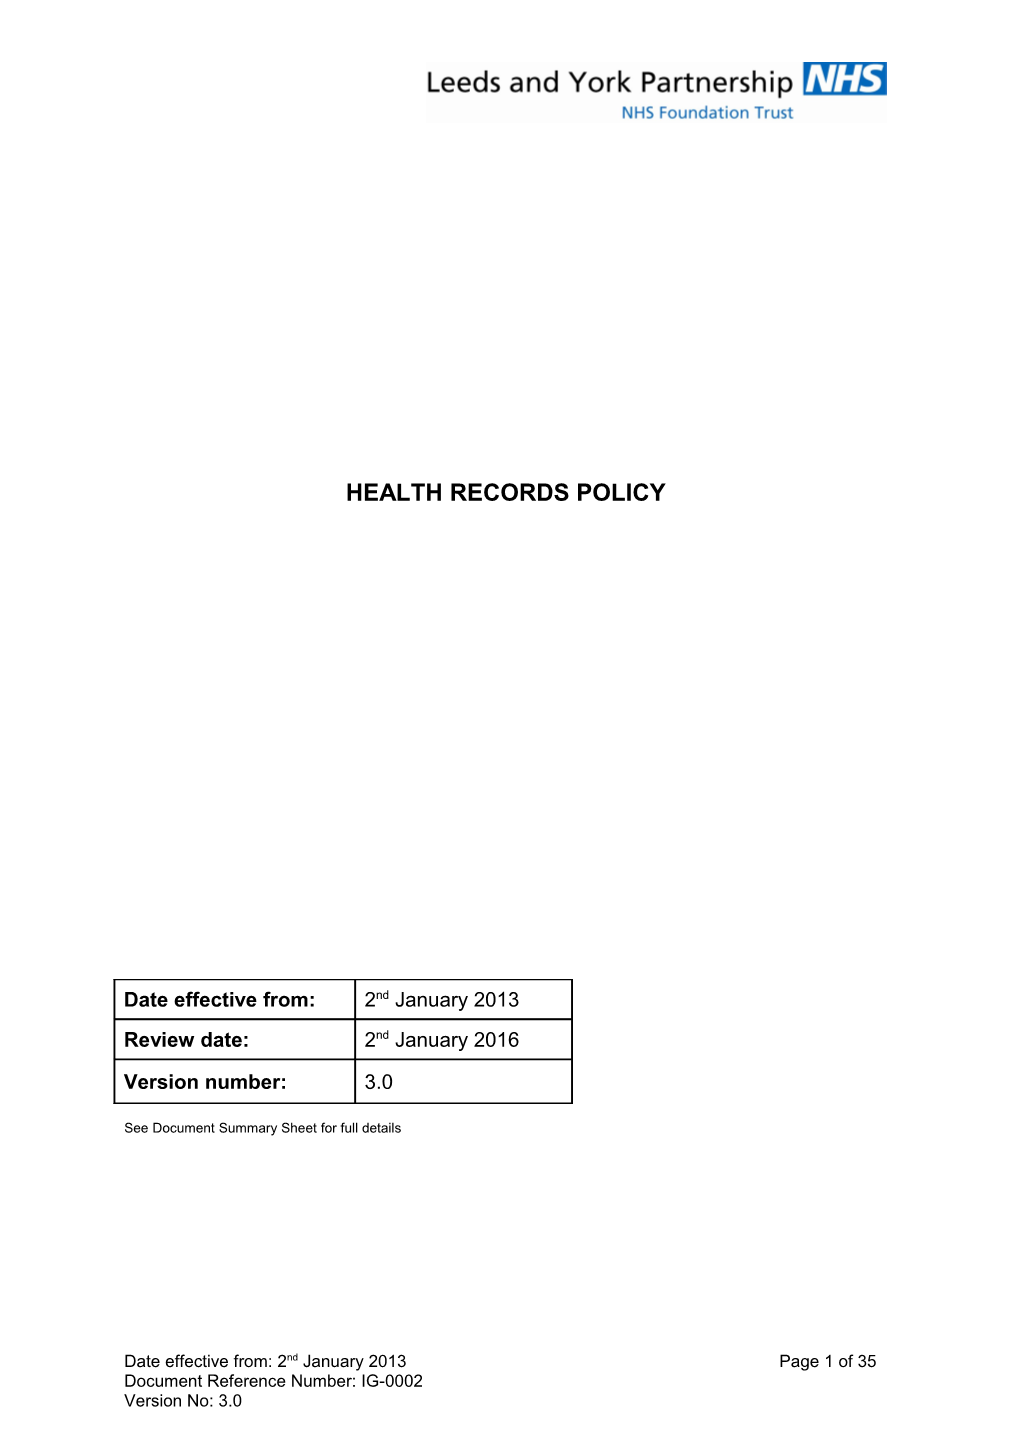 Health Records Policy